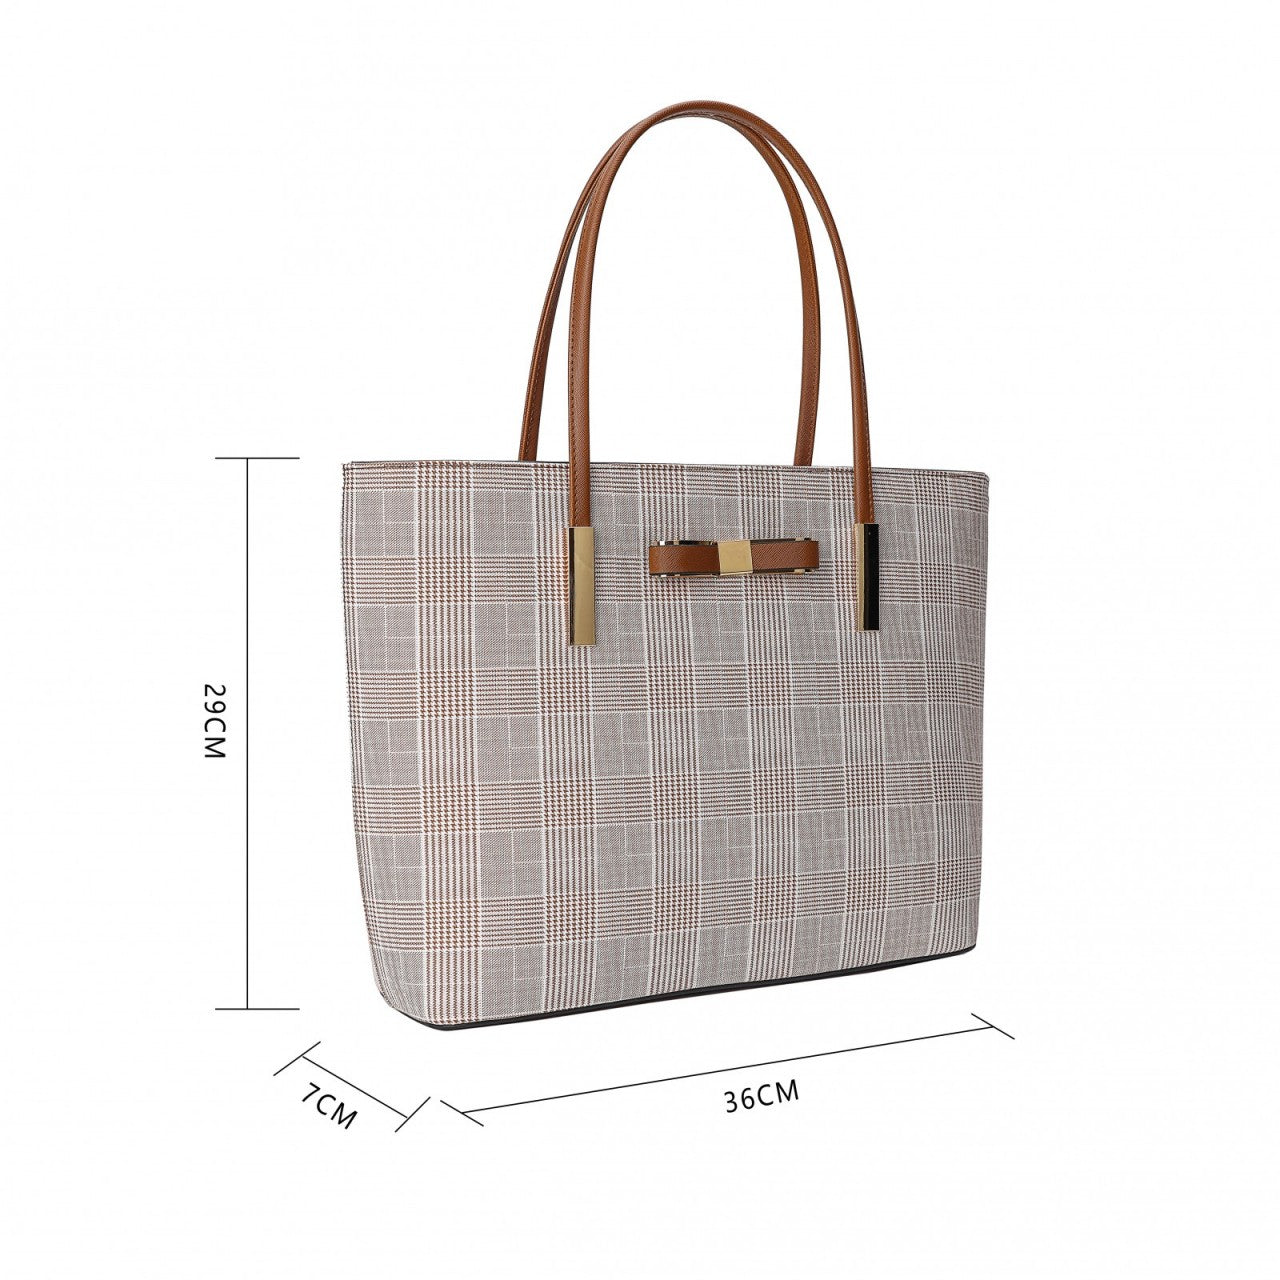 LYDC Bow Details Large Tote / Shoulder Bag with CHECKERED pattern